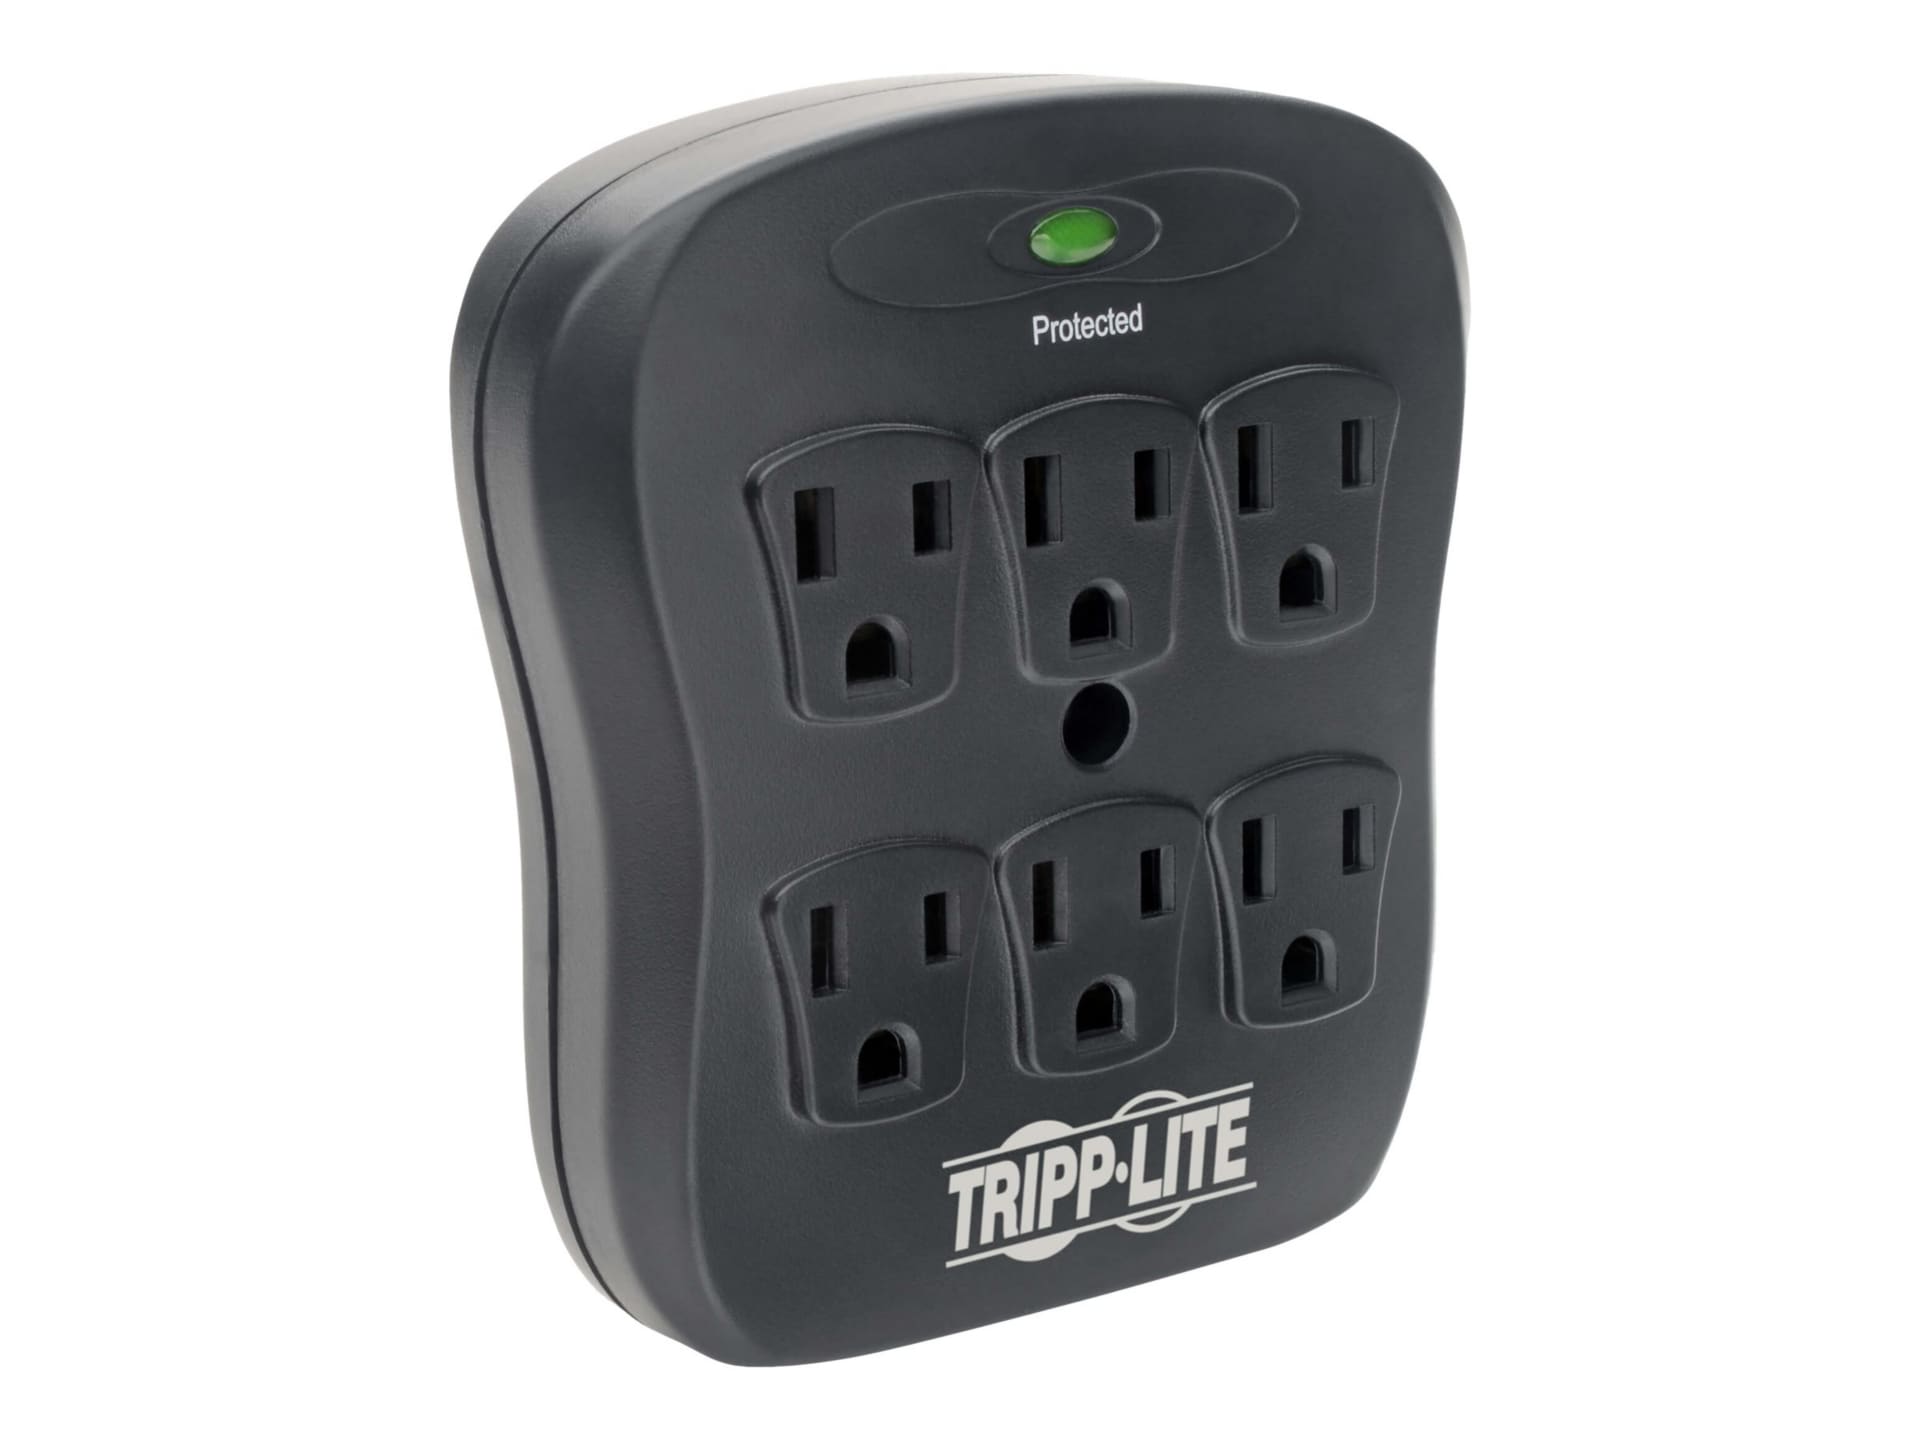 Tripp Lite Surge Protector Wallmount Direct Plug In 120V 6 Outlet 750 Joules Black - surge protector - 1800 Watt